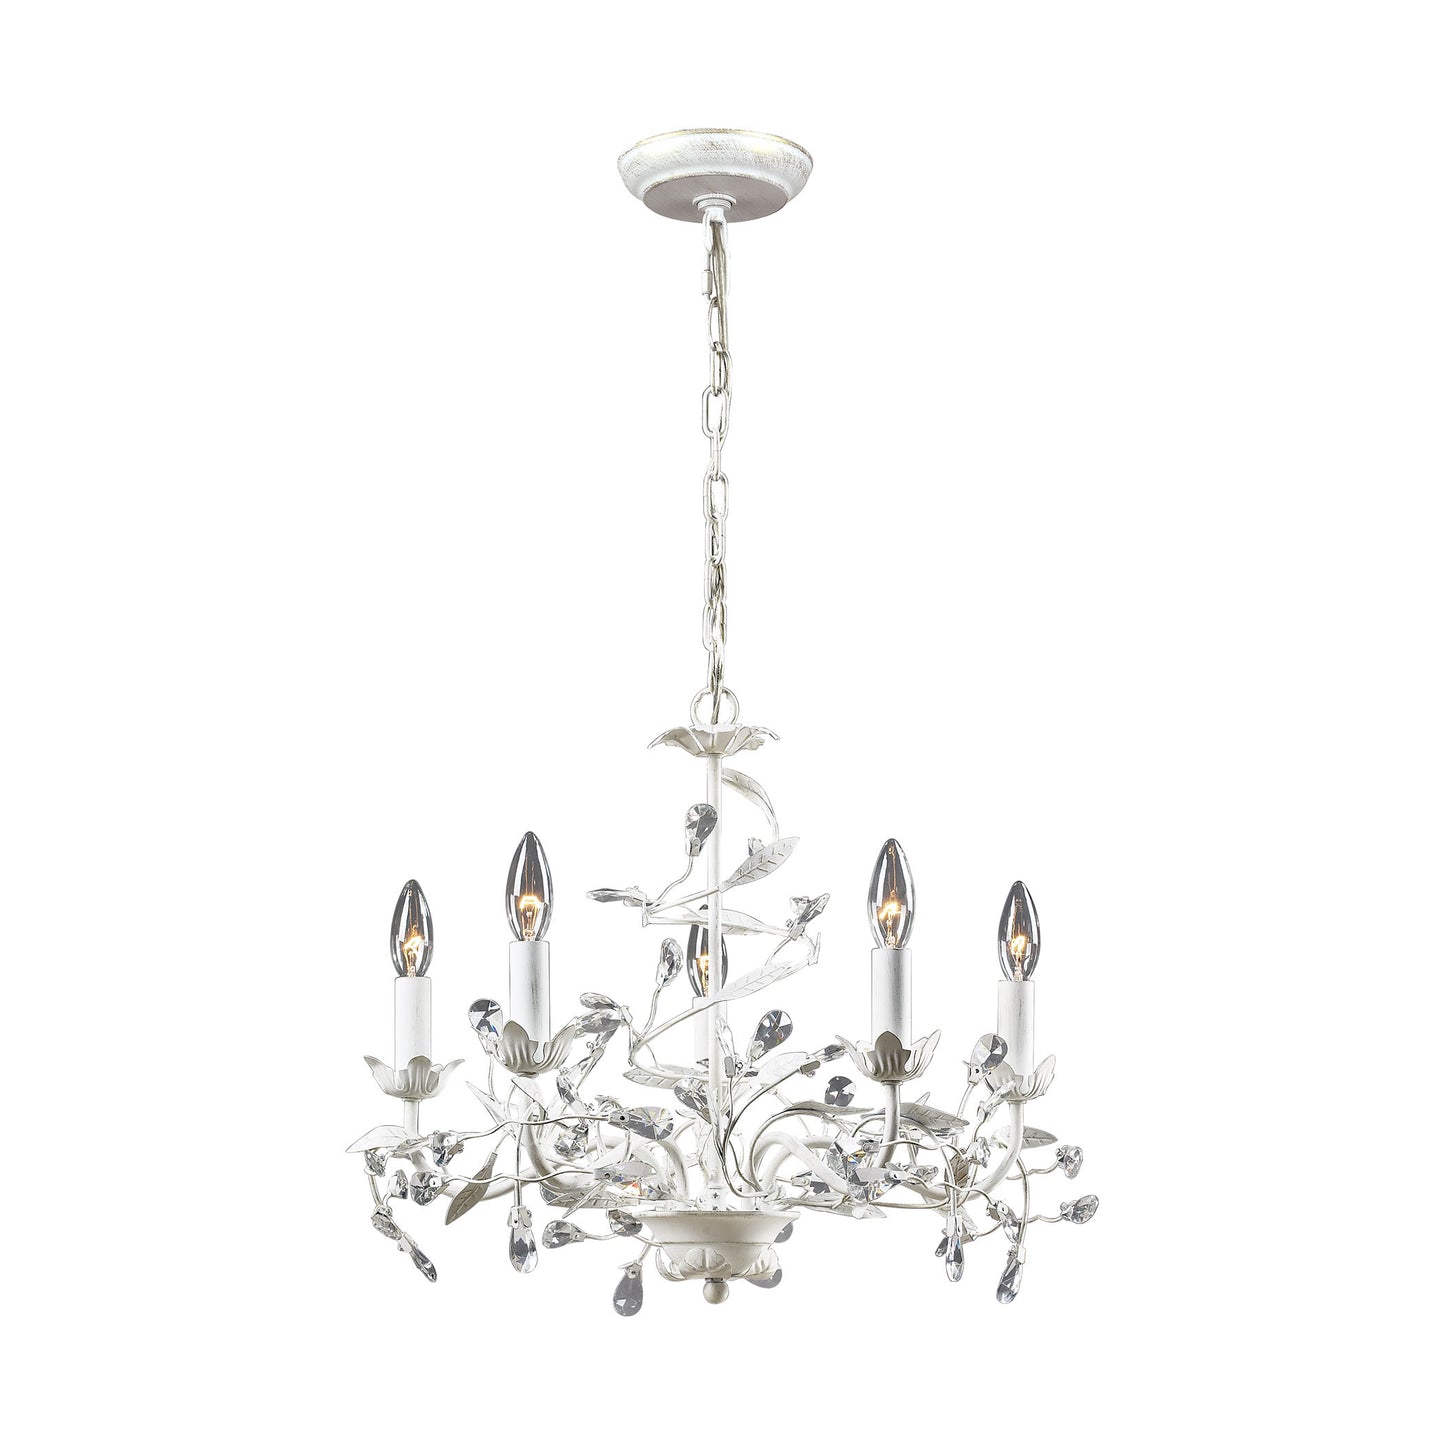 ELK Lighting 18113/5 - Circeo 21" Wide 5-Light Chandelier in Antique White with Crystal